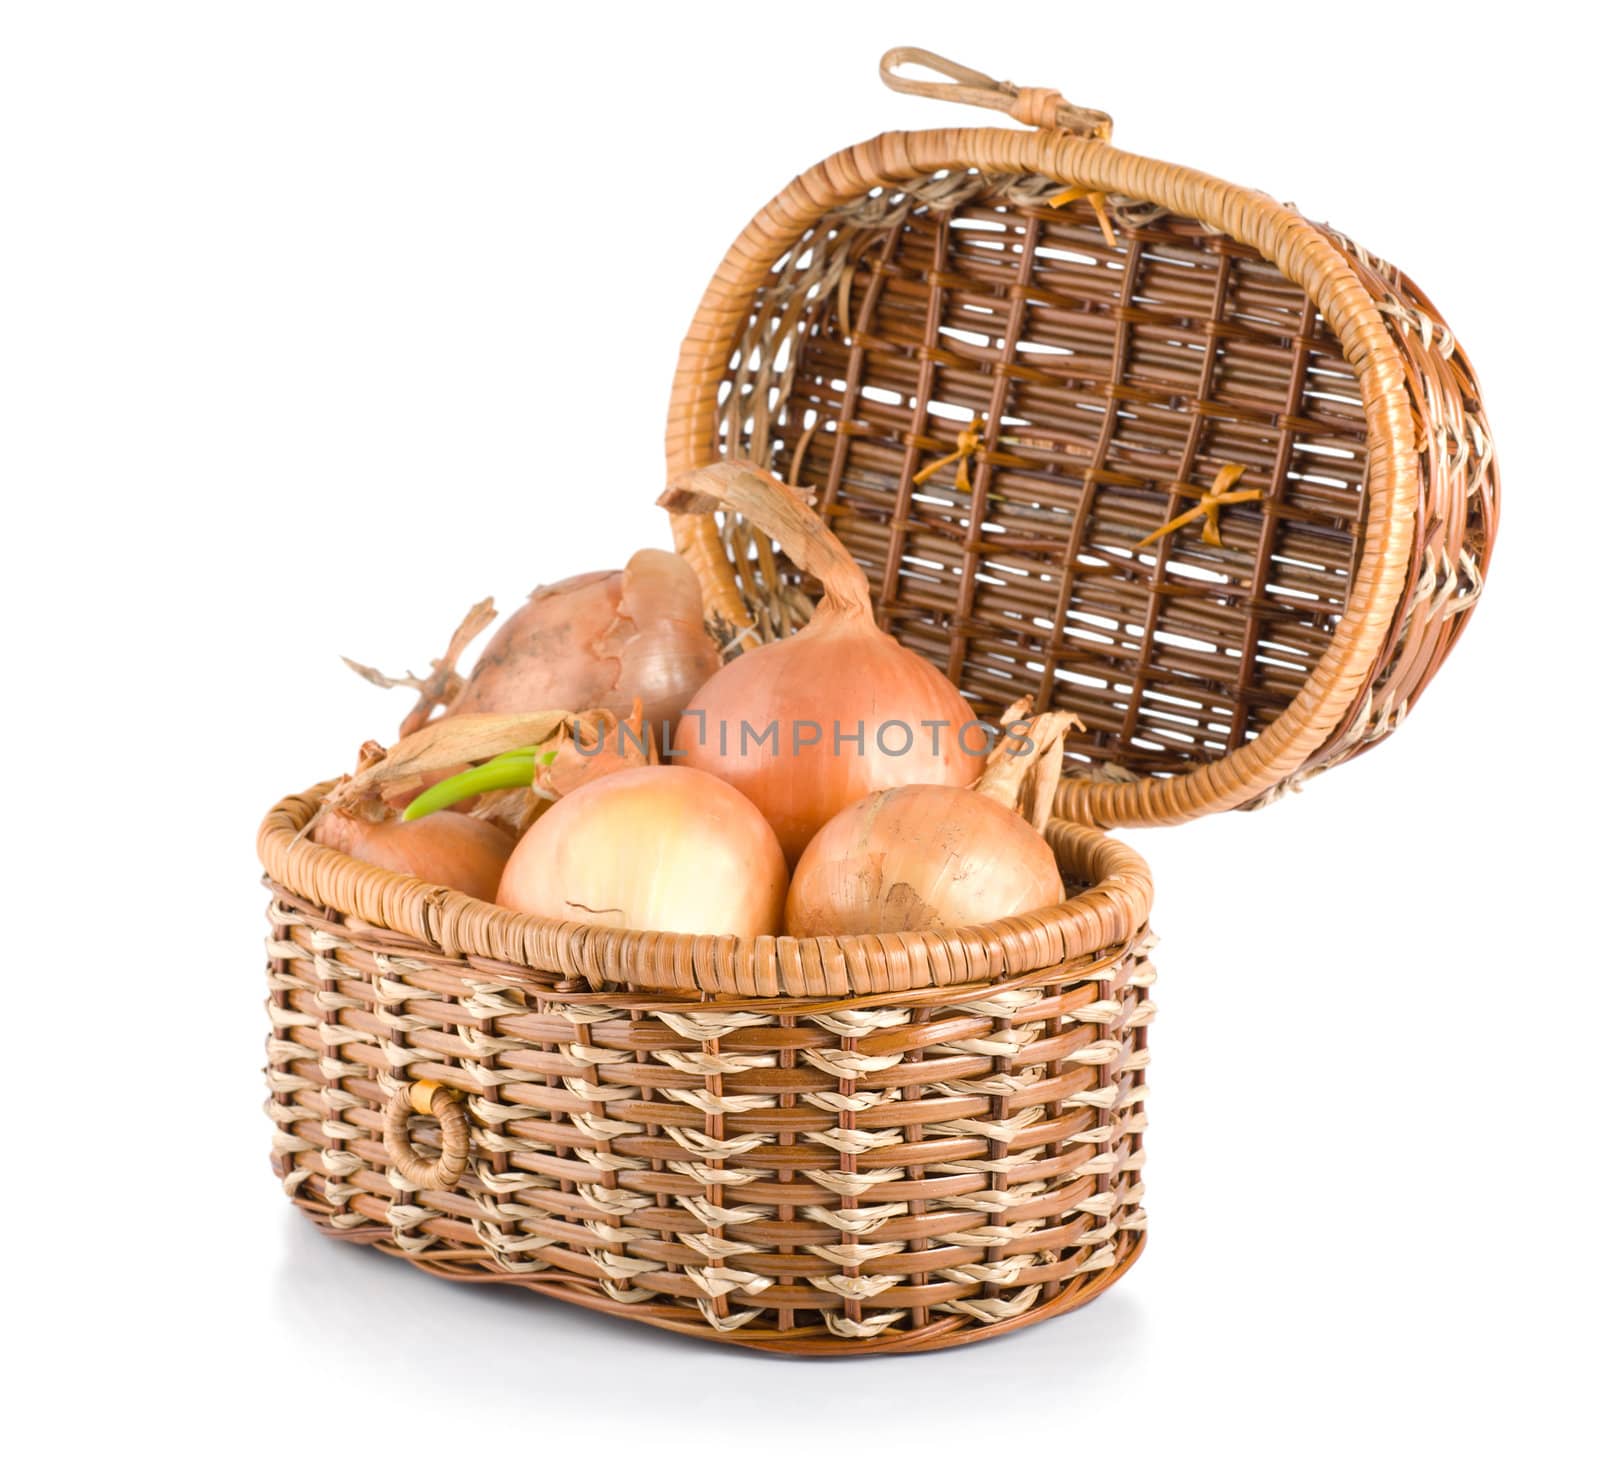 Raw onion in a wooden basket isolated on a white background